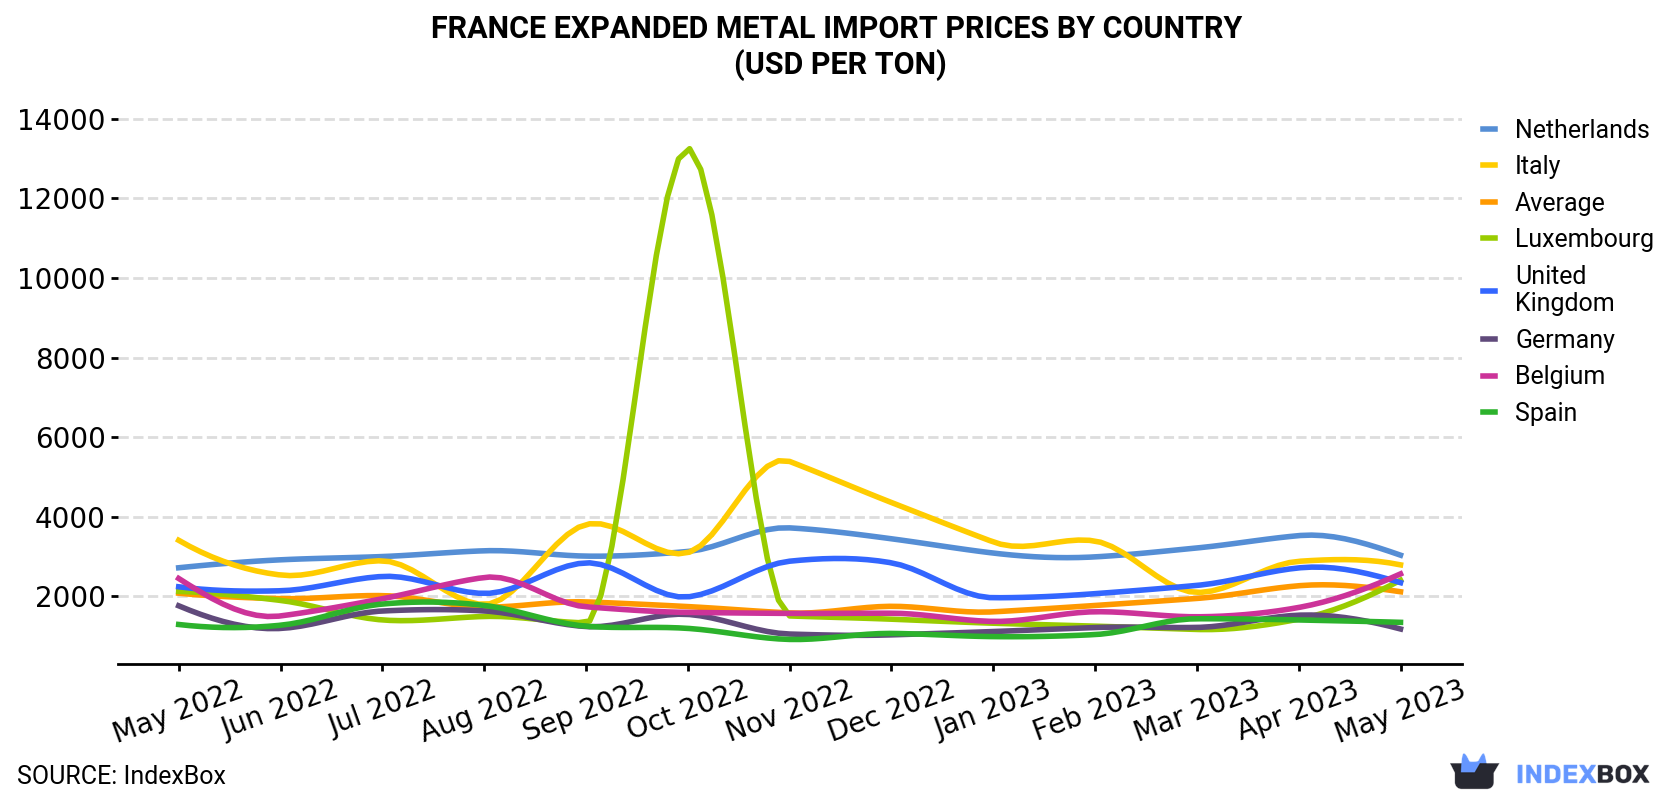 France Expanded Metal Import Prices By Country (USD Per Ton)